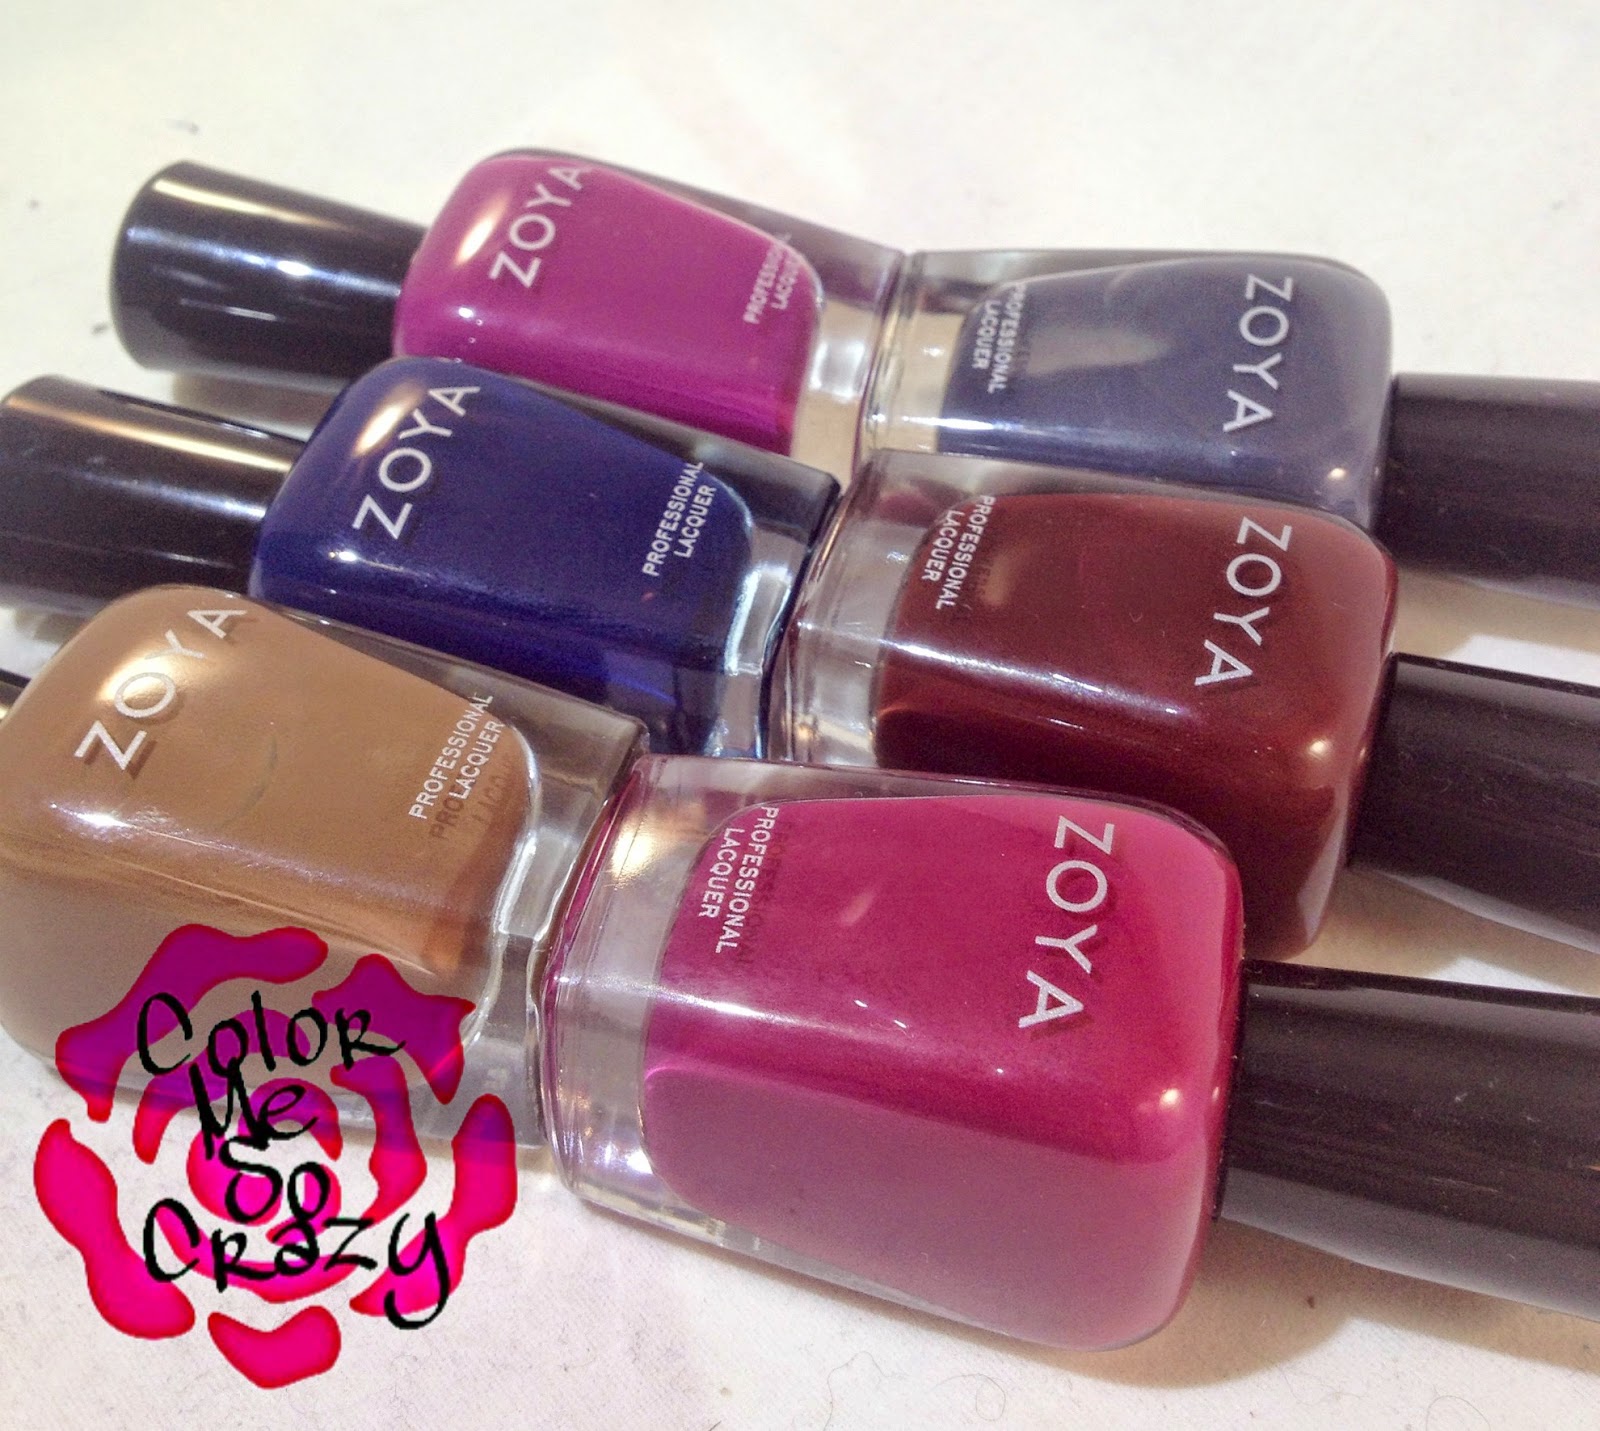 ZOYA ENTICE COLLECTION